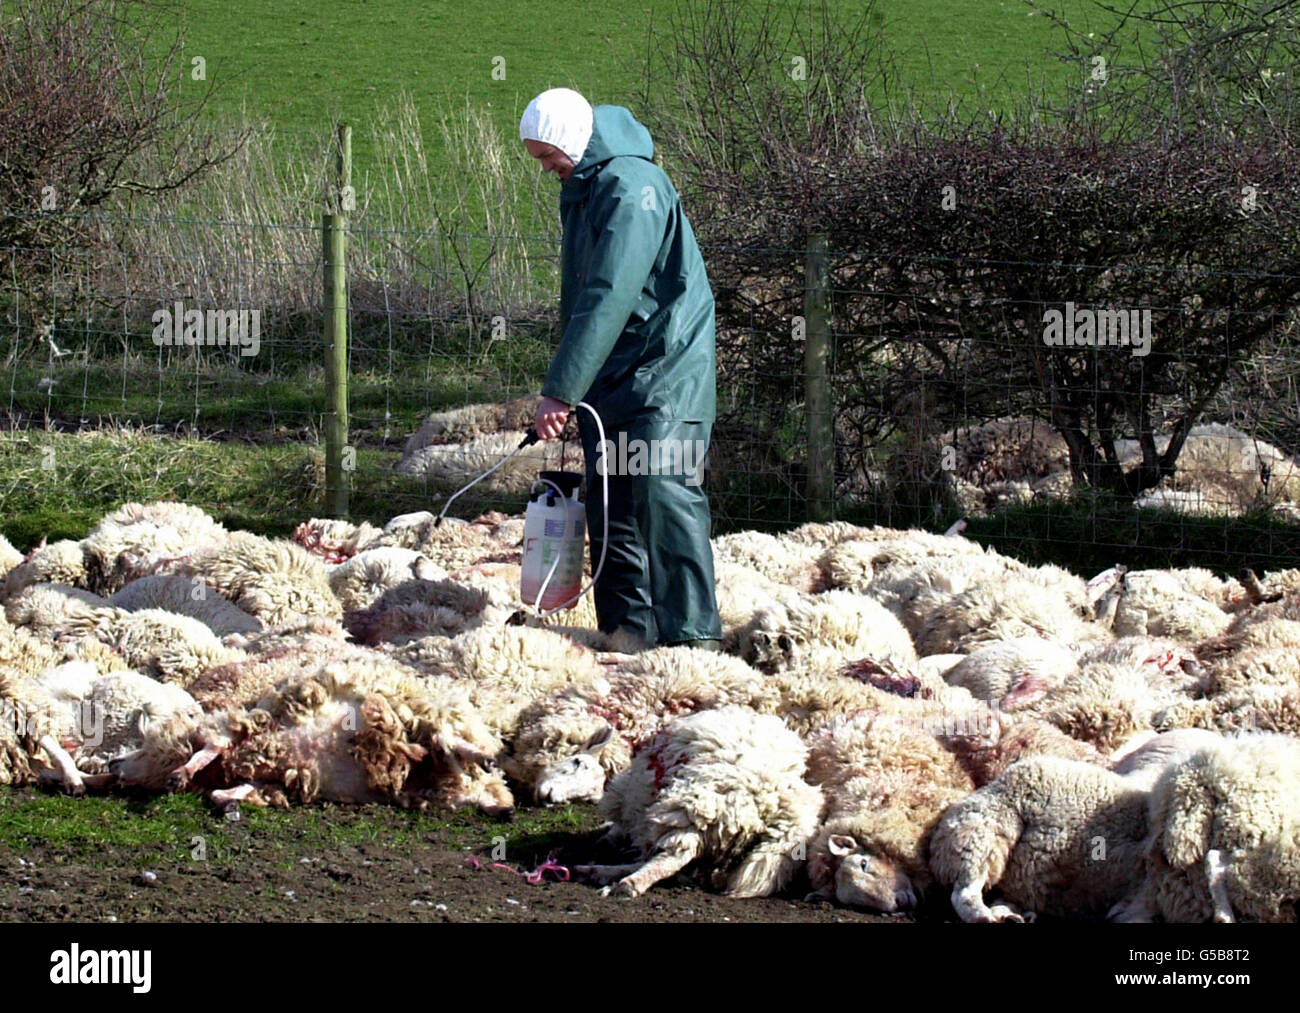 A vet from the Ministry of Agriculture, Fisheries and Food sprays sheep after slaughtering on a farm at Thornby, nr Wigton in Cumbria, which has been named as the 1,000th case of foot and mouth in Great Britain. * There has also been one further case in Northern Ireland. Evidence that the crisis may have turned a corner was delivered to Prime Minister Tony Blair at Downing Street earlier by the chief scientific adviser Professor David King. Earlier projections that the outbreak would spiral to more than 4,400 cases by June 2001 have now been revised down. Stock Photo